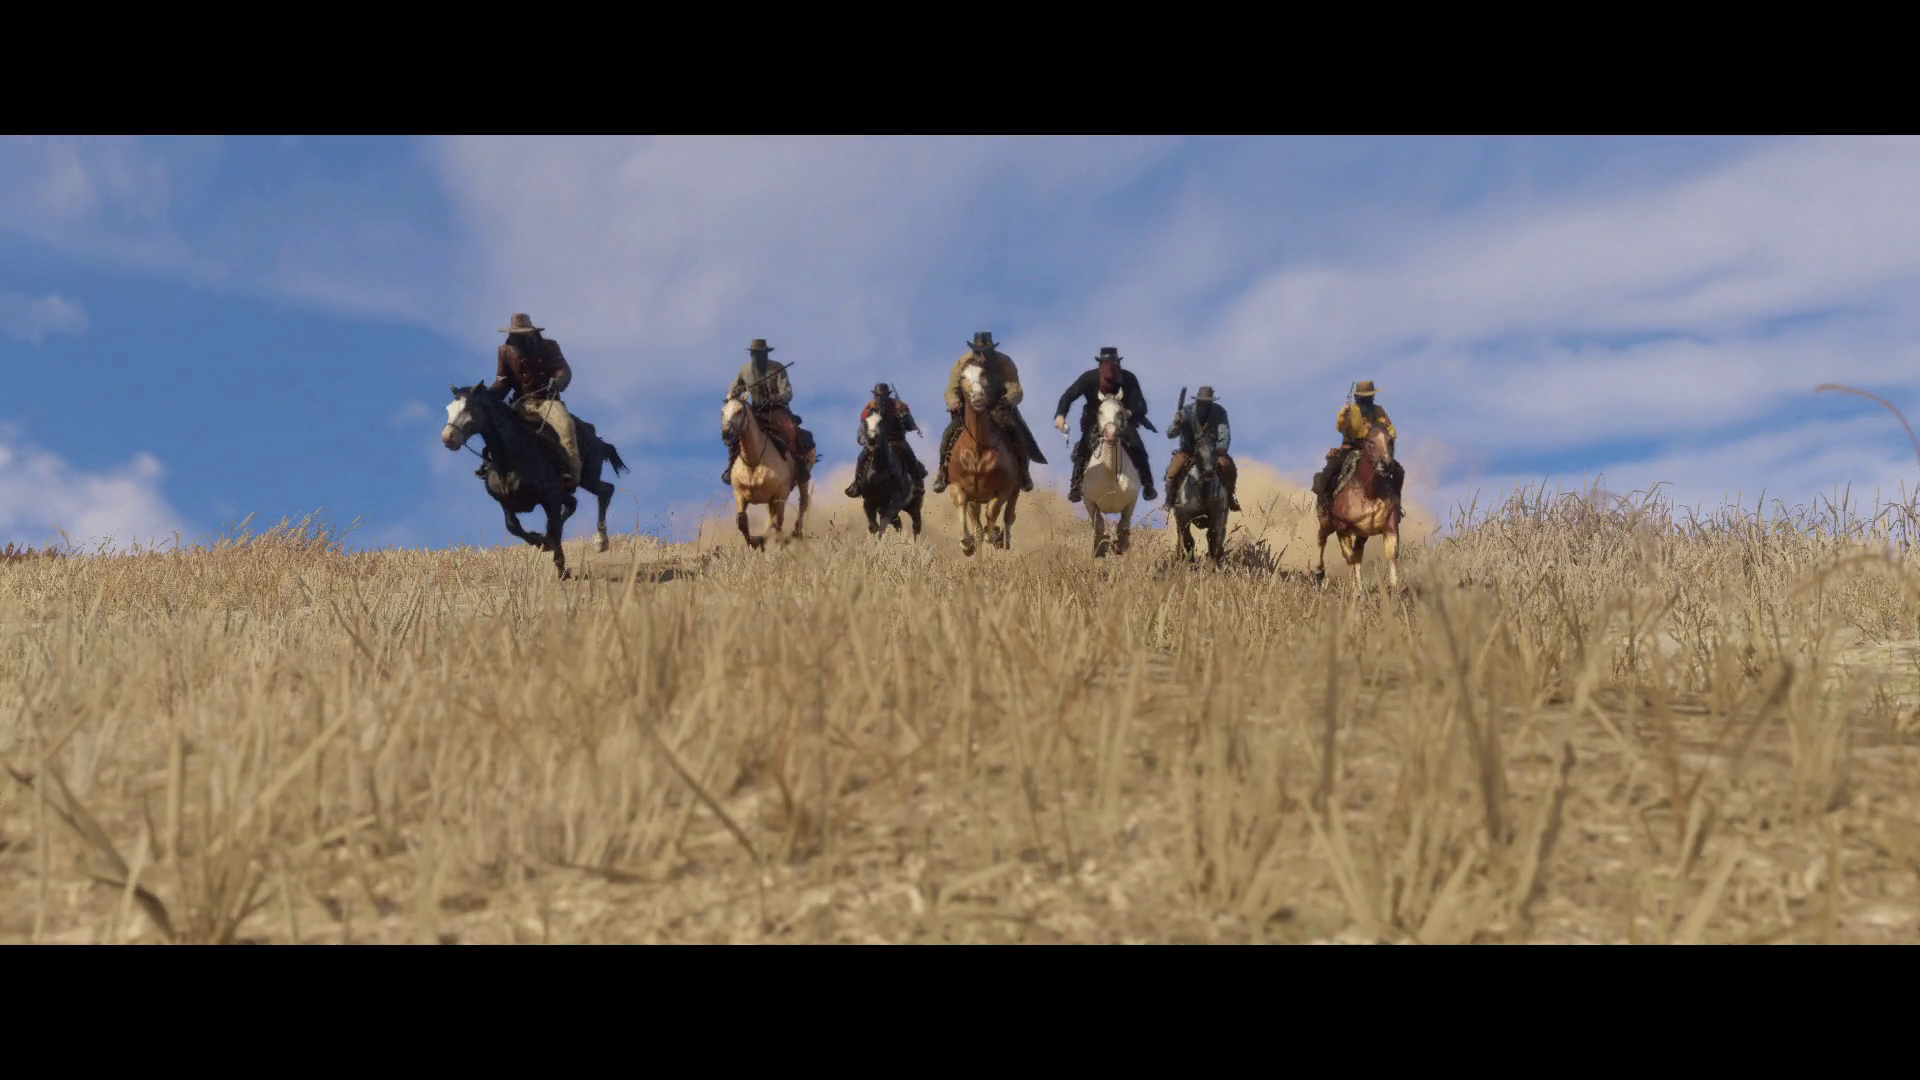 http://www.rdrvision.com/images/content/red-dead-redemption-2/trailer_1/red-dead-redemption-2_trailer-1_23.png